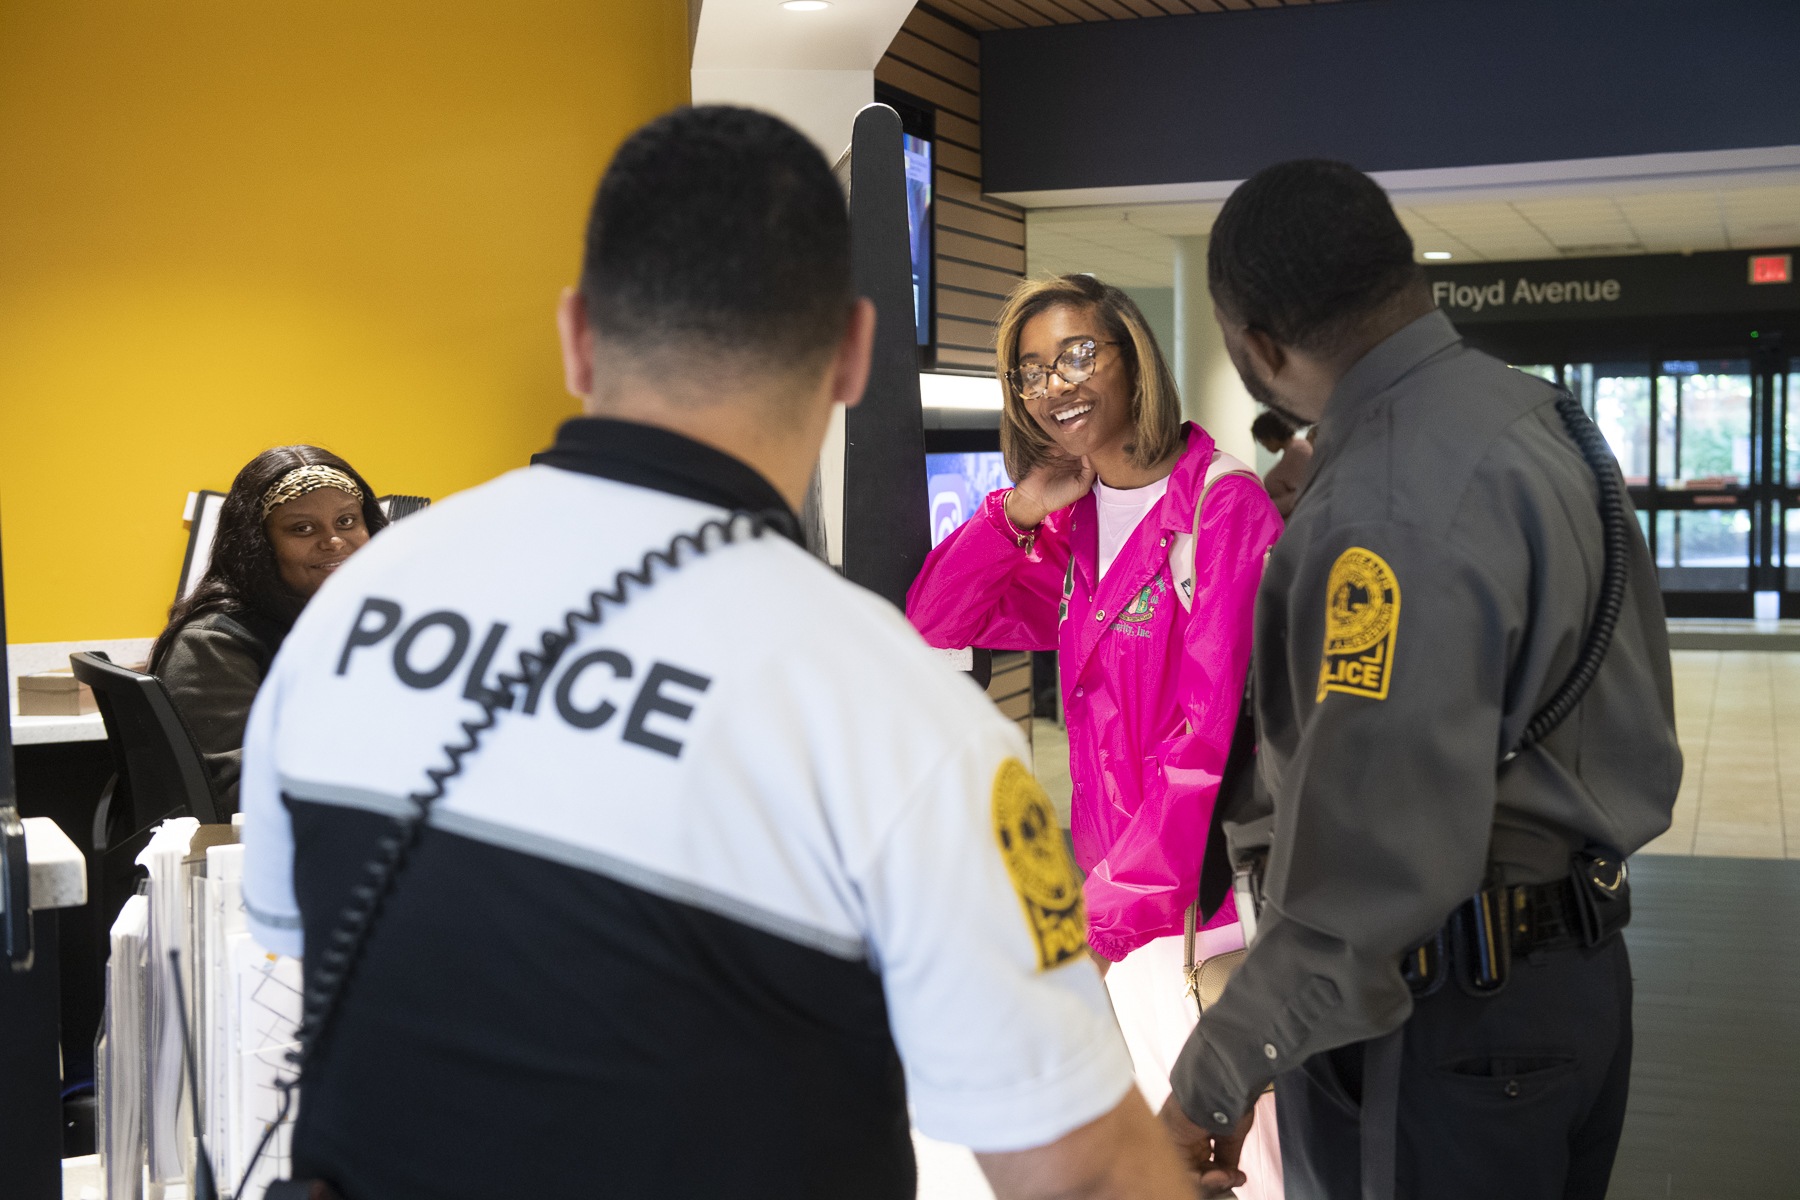 Smiling VCU students chat with police officers.